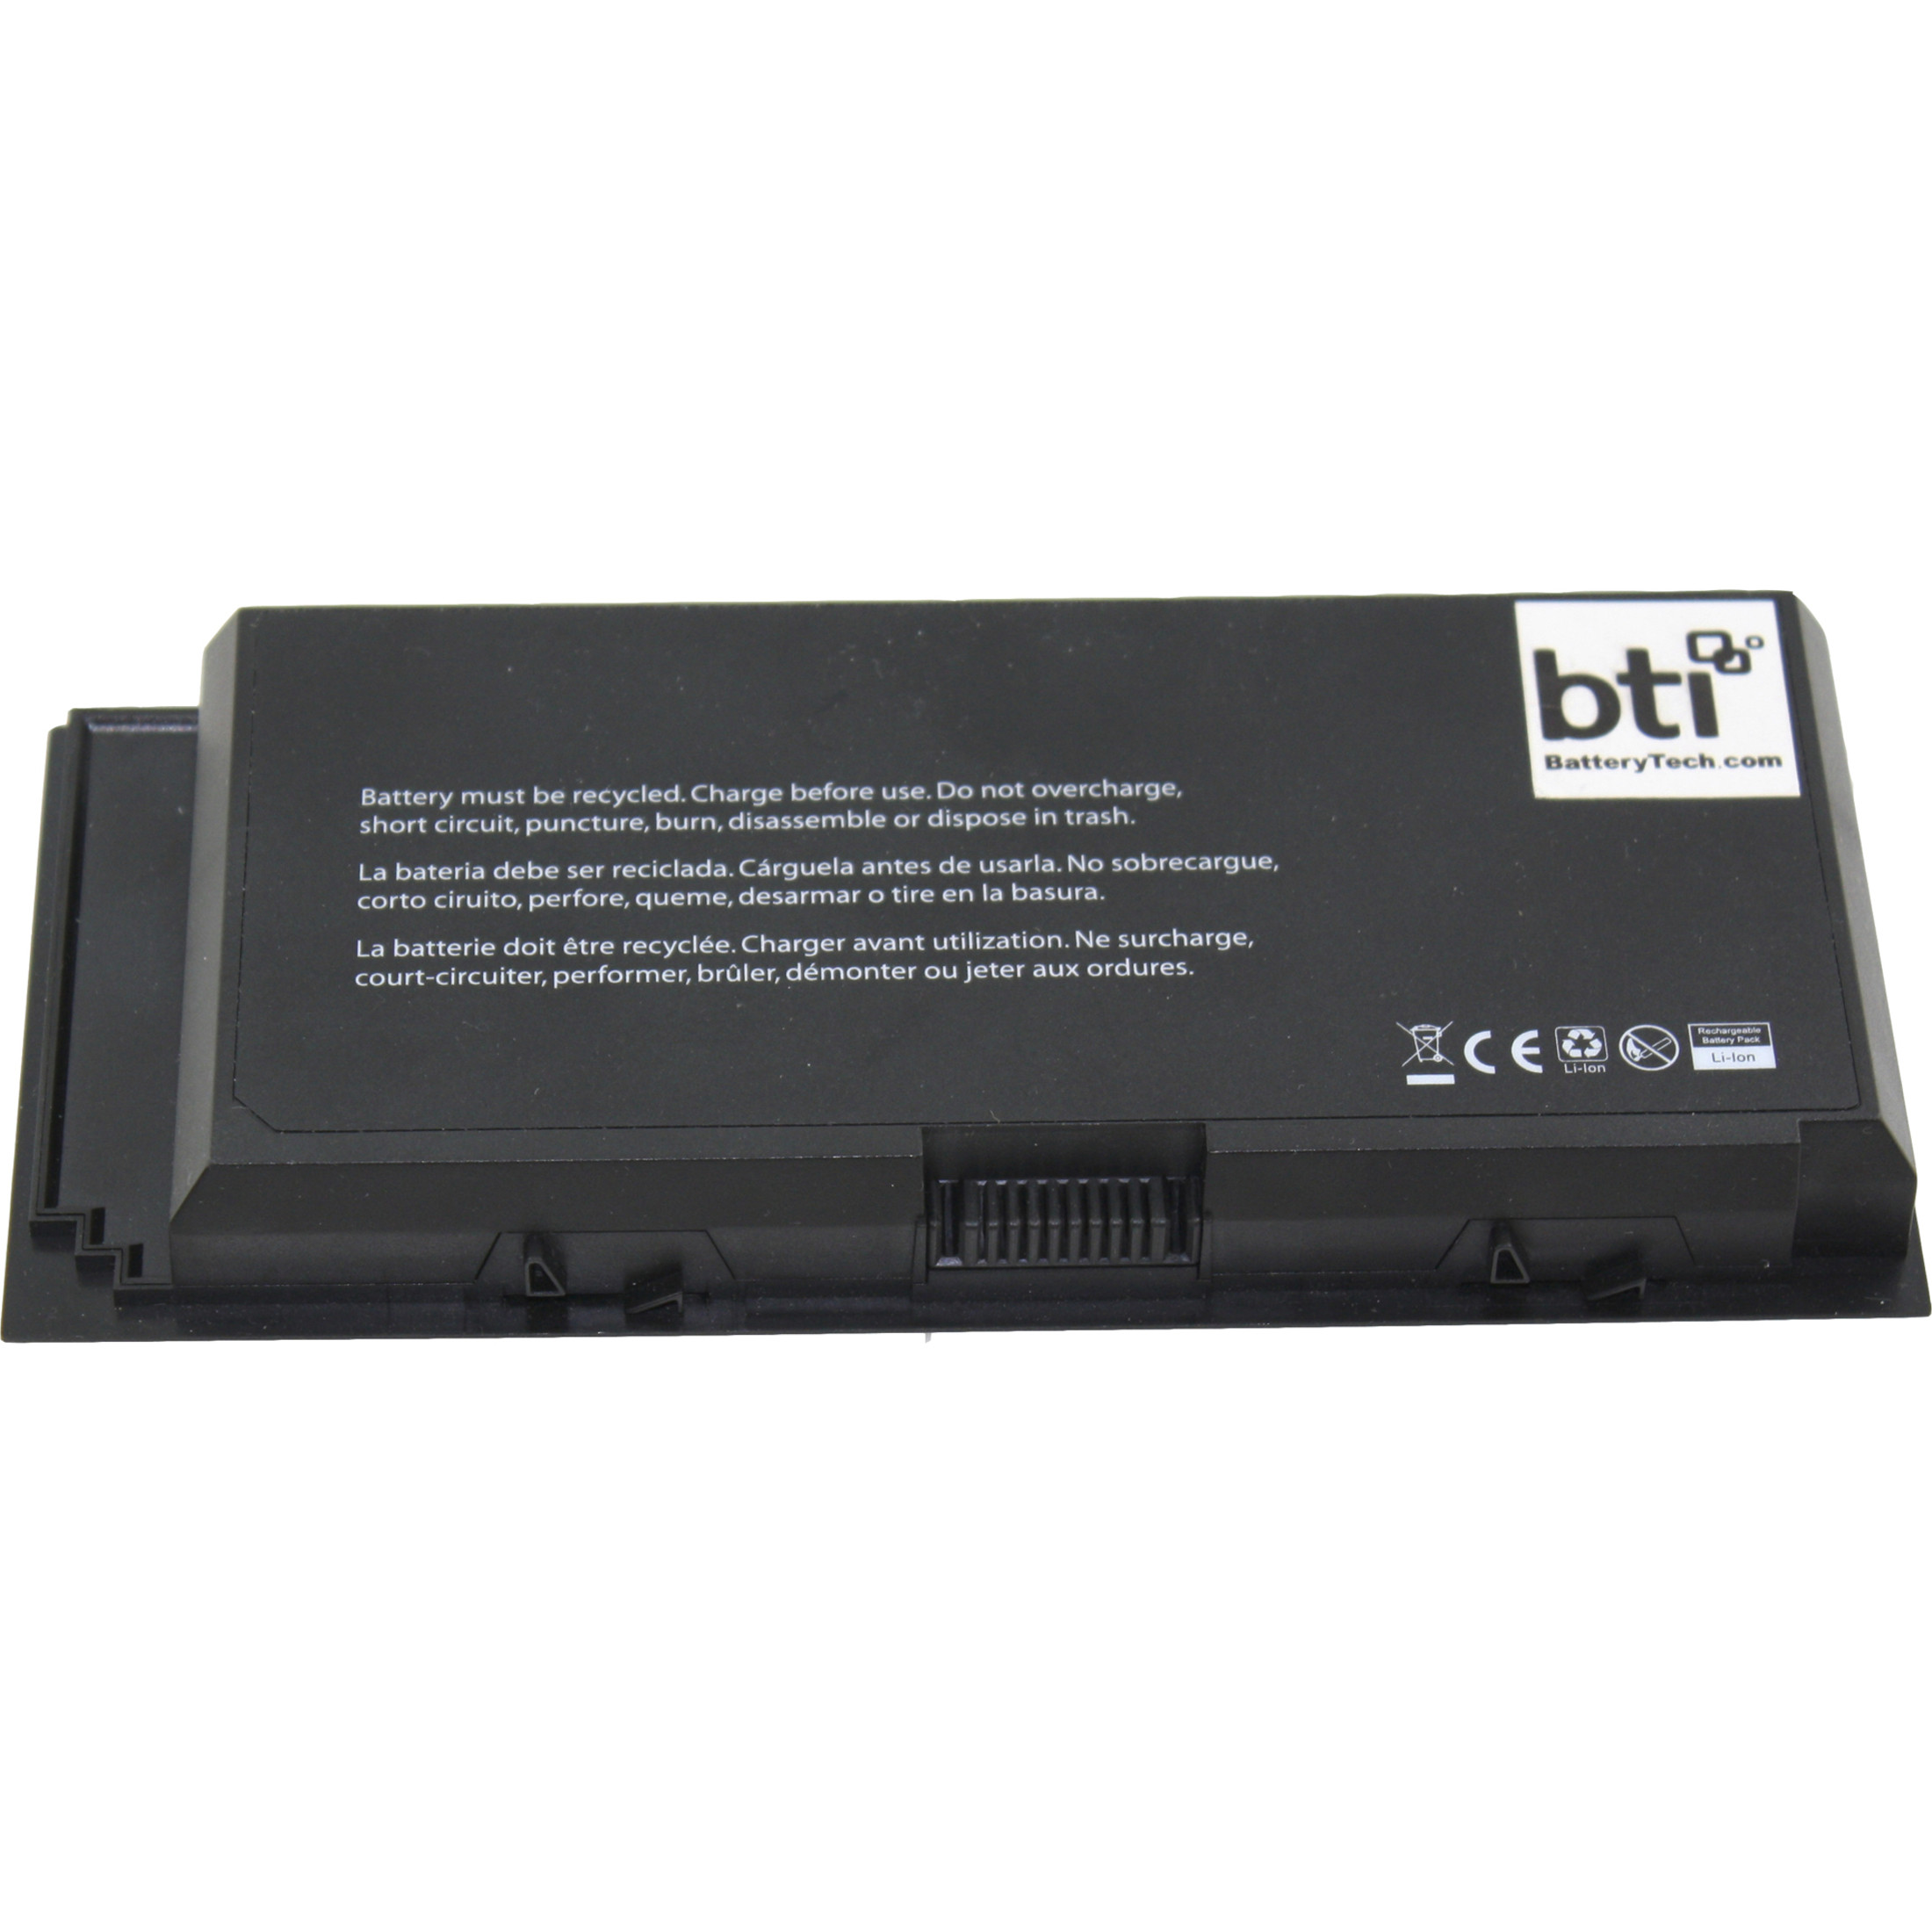 Battery Technology BTI For Notebook Rechargeable 312-1353-BTI